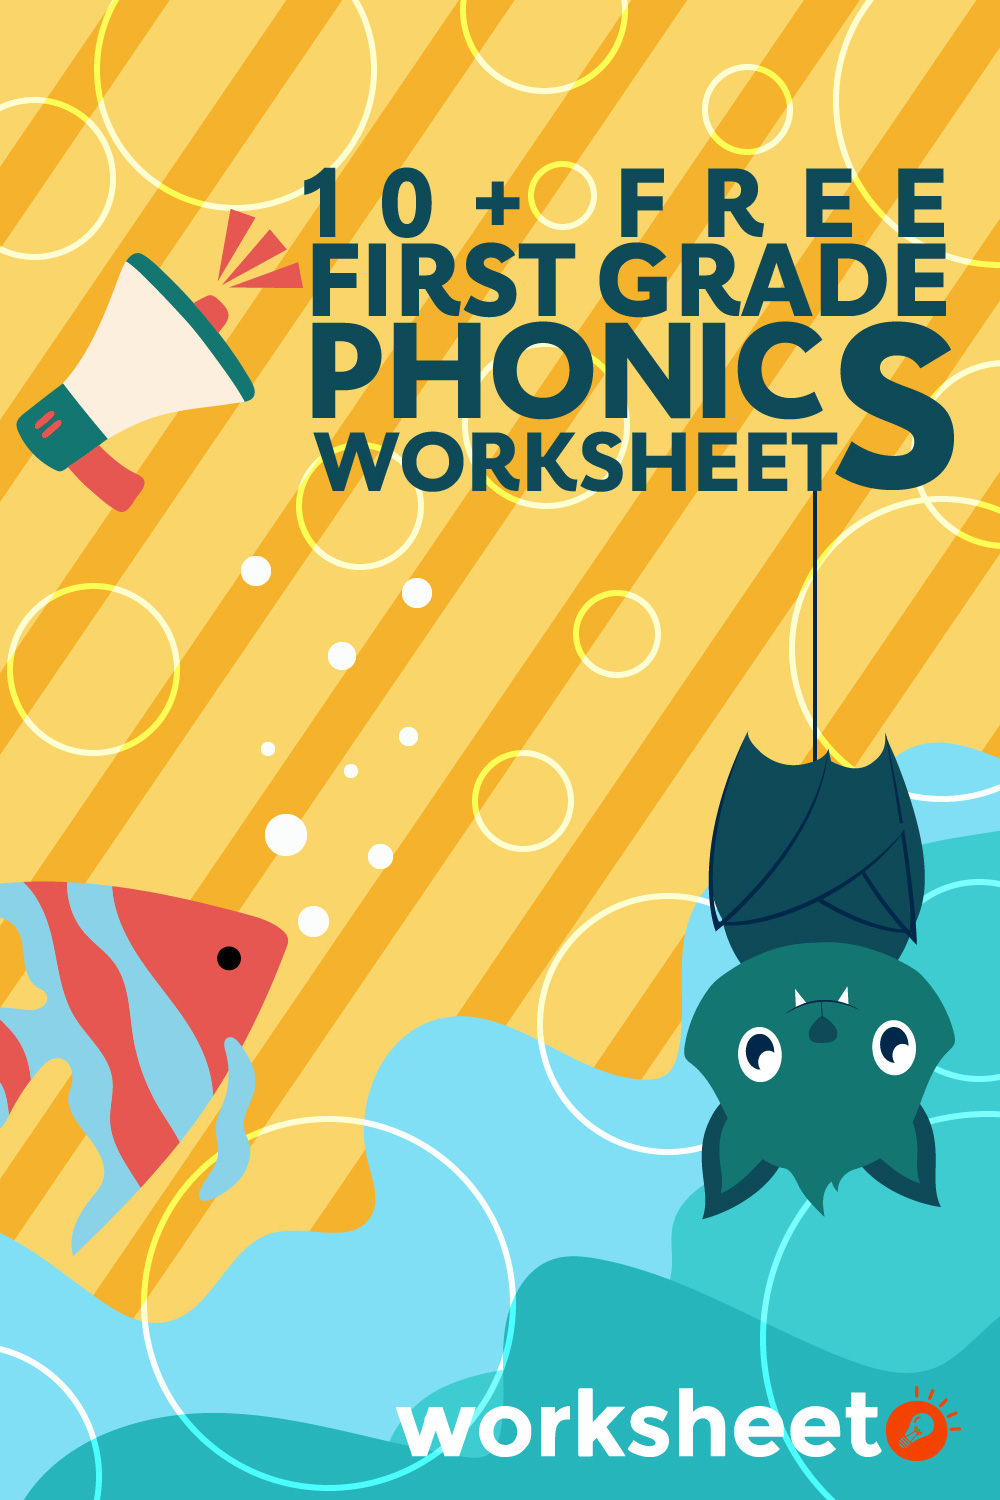 Free First Grade Phonics Worksheets